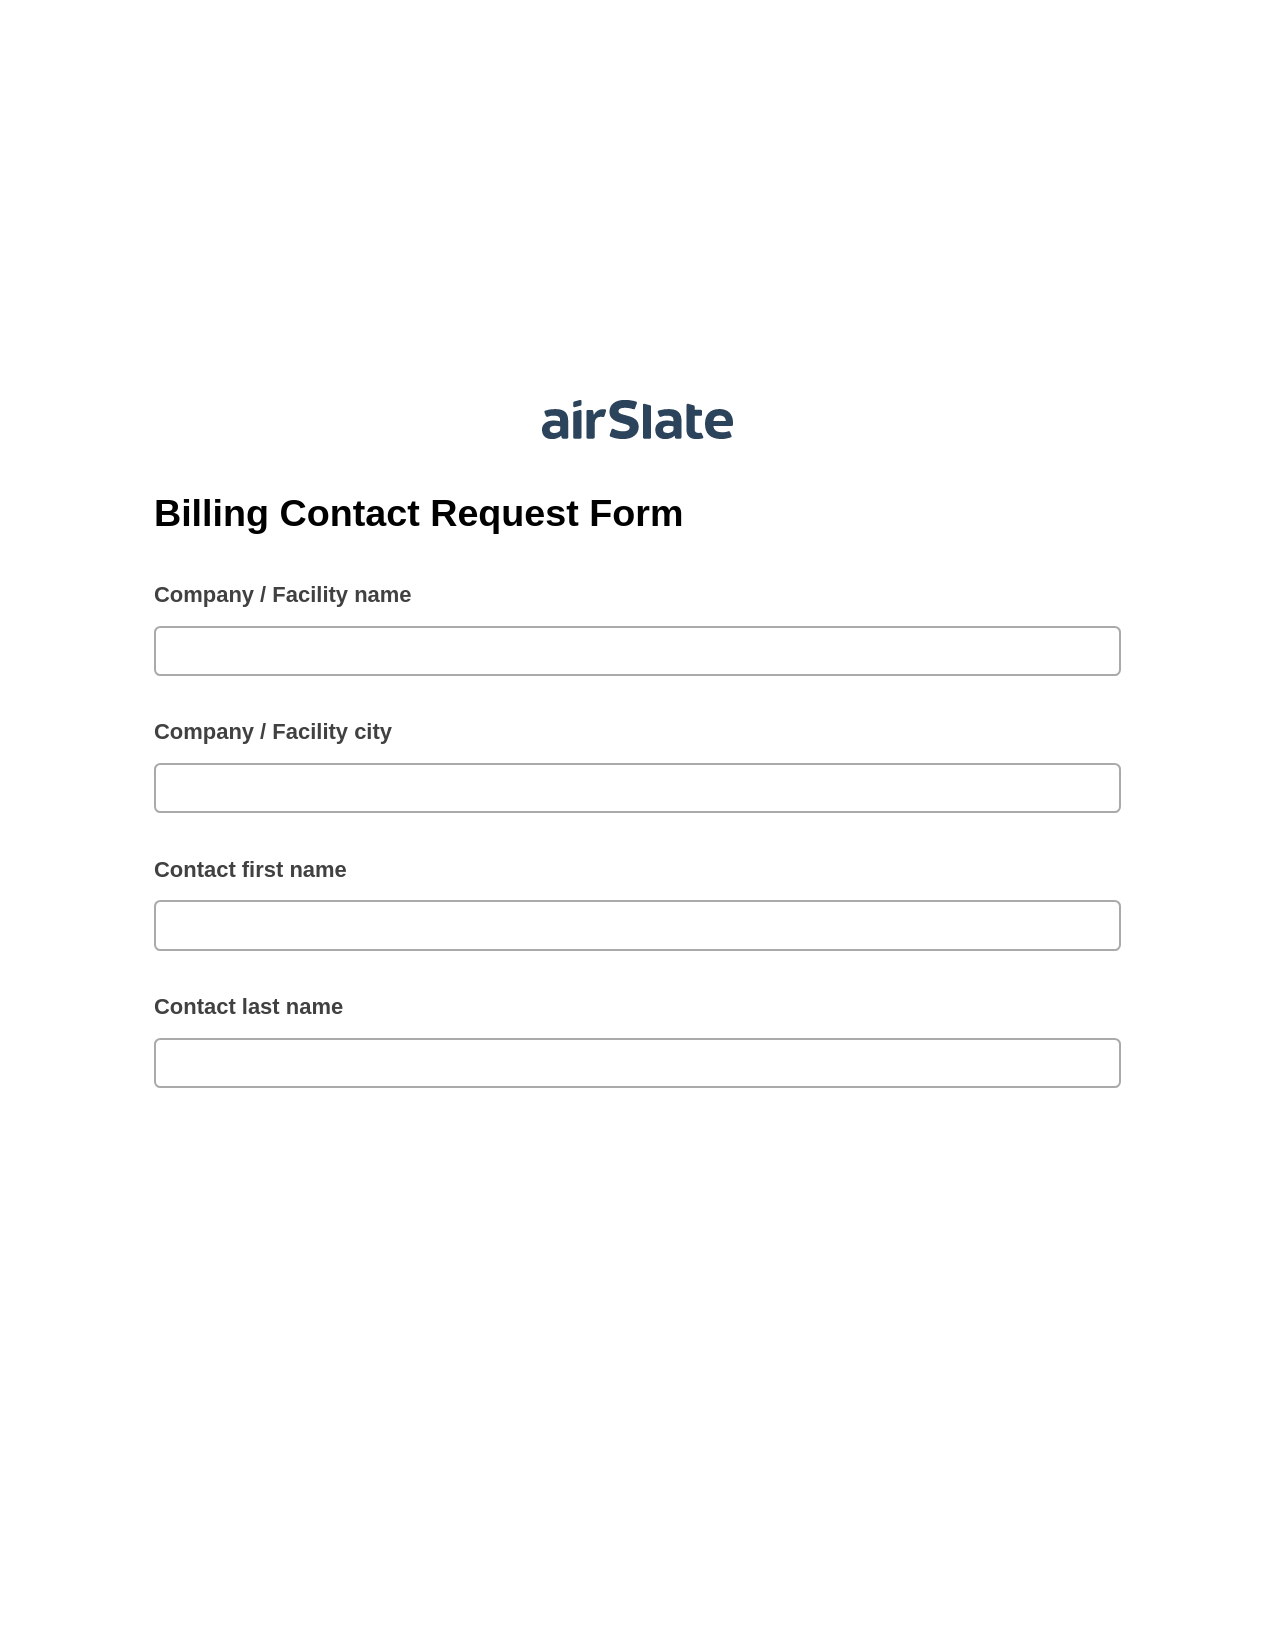 Multirole Billing Contact Request Form Pre-fill Dropdowns from MySQL Bot, Send Mailchimp Campaign Bot, Export to MySQL Bot